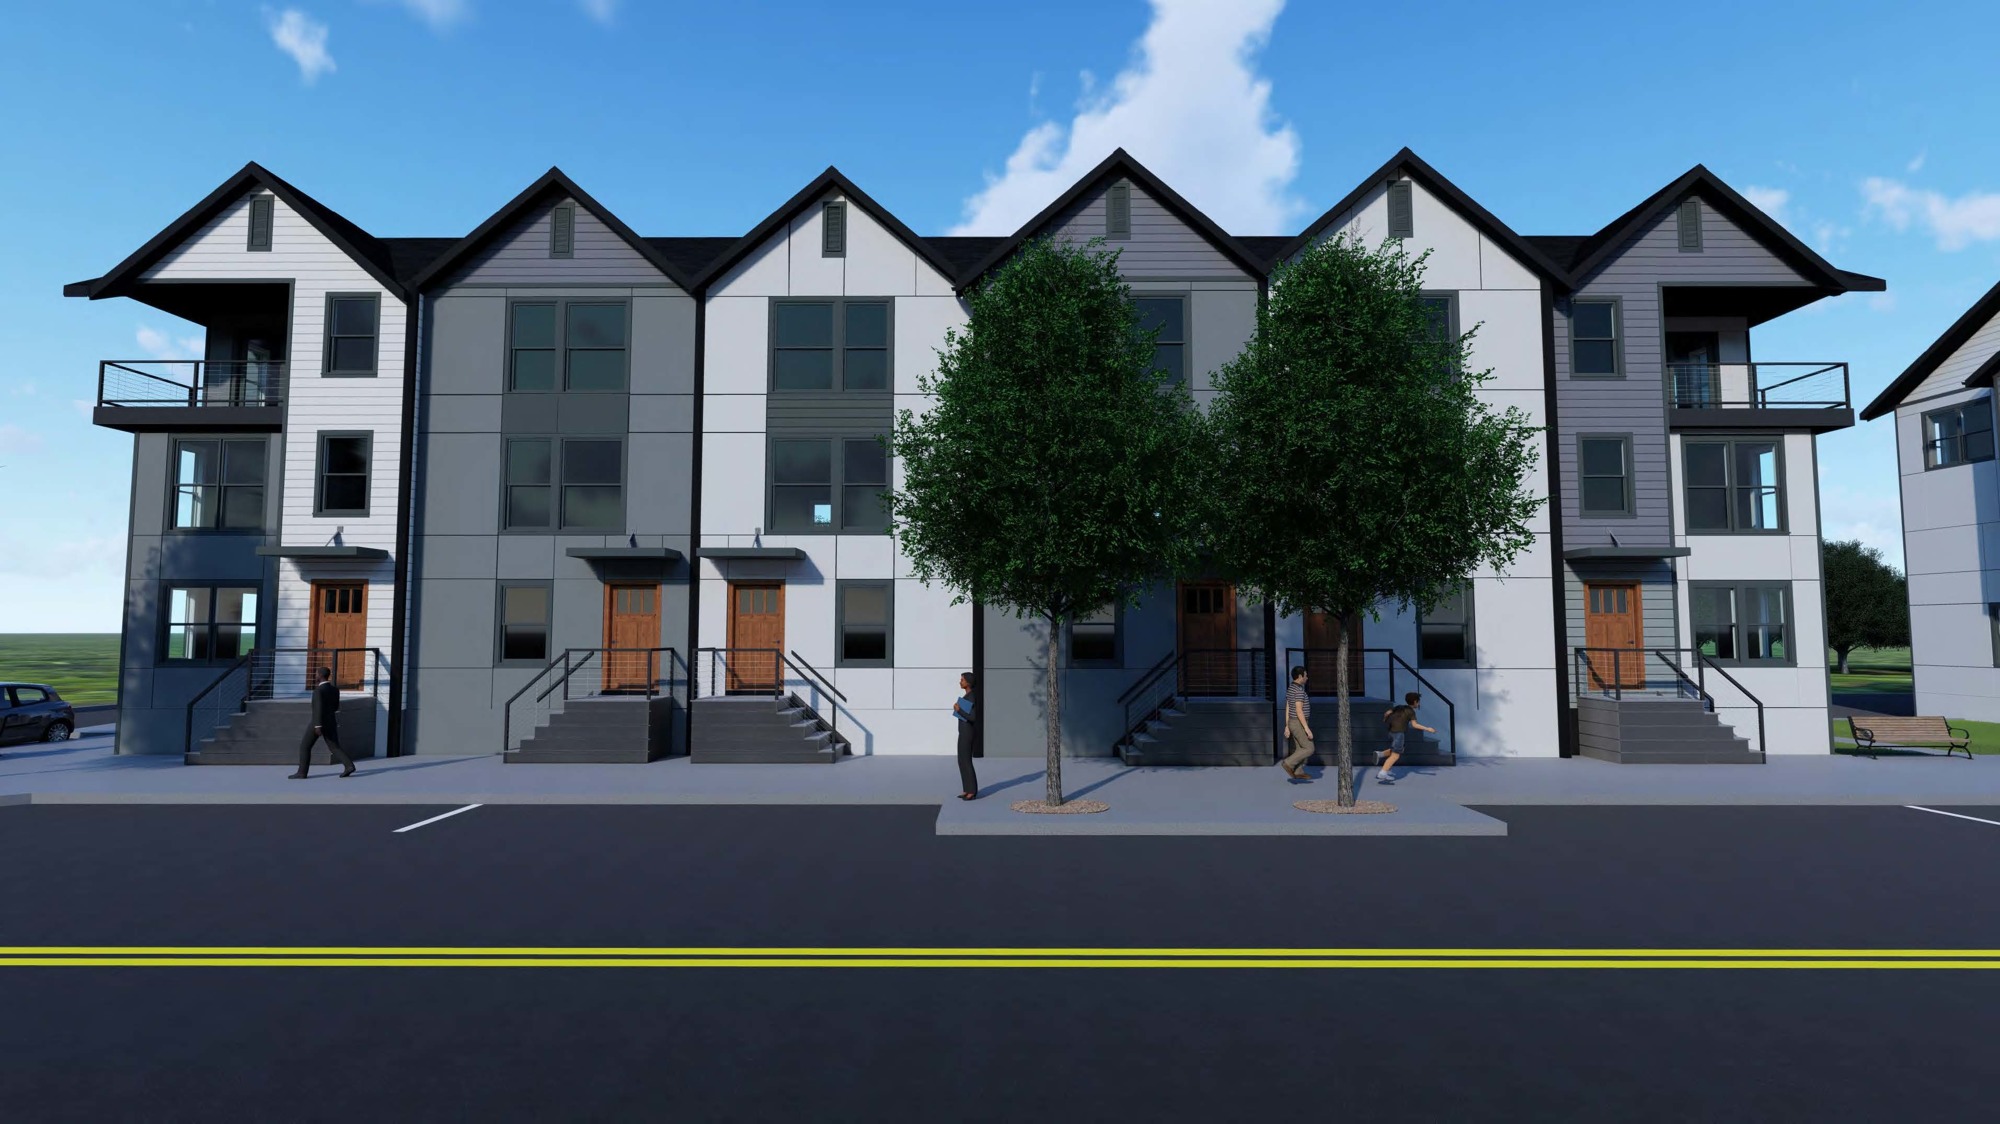 The town houses will feature a shotgun-style design with gabled roofs.